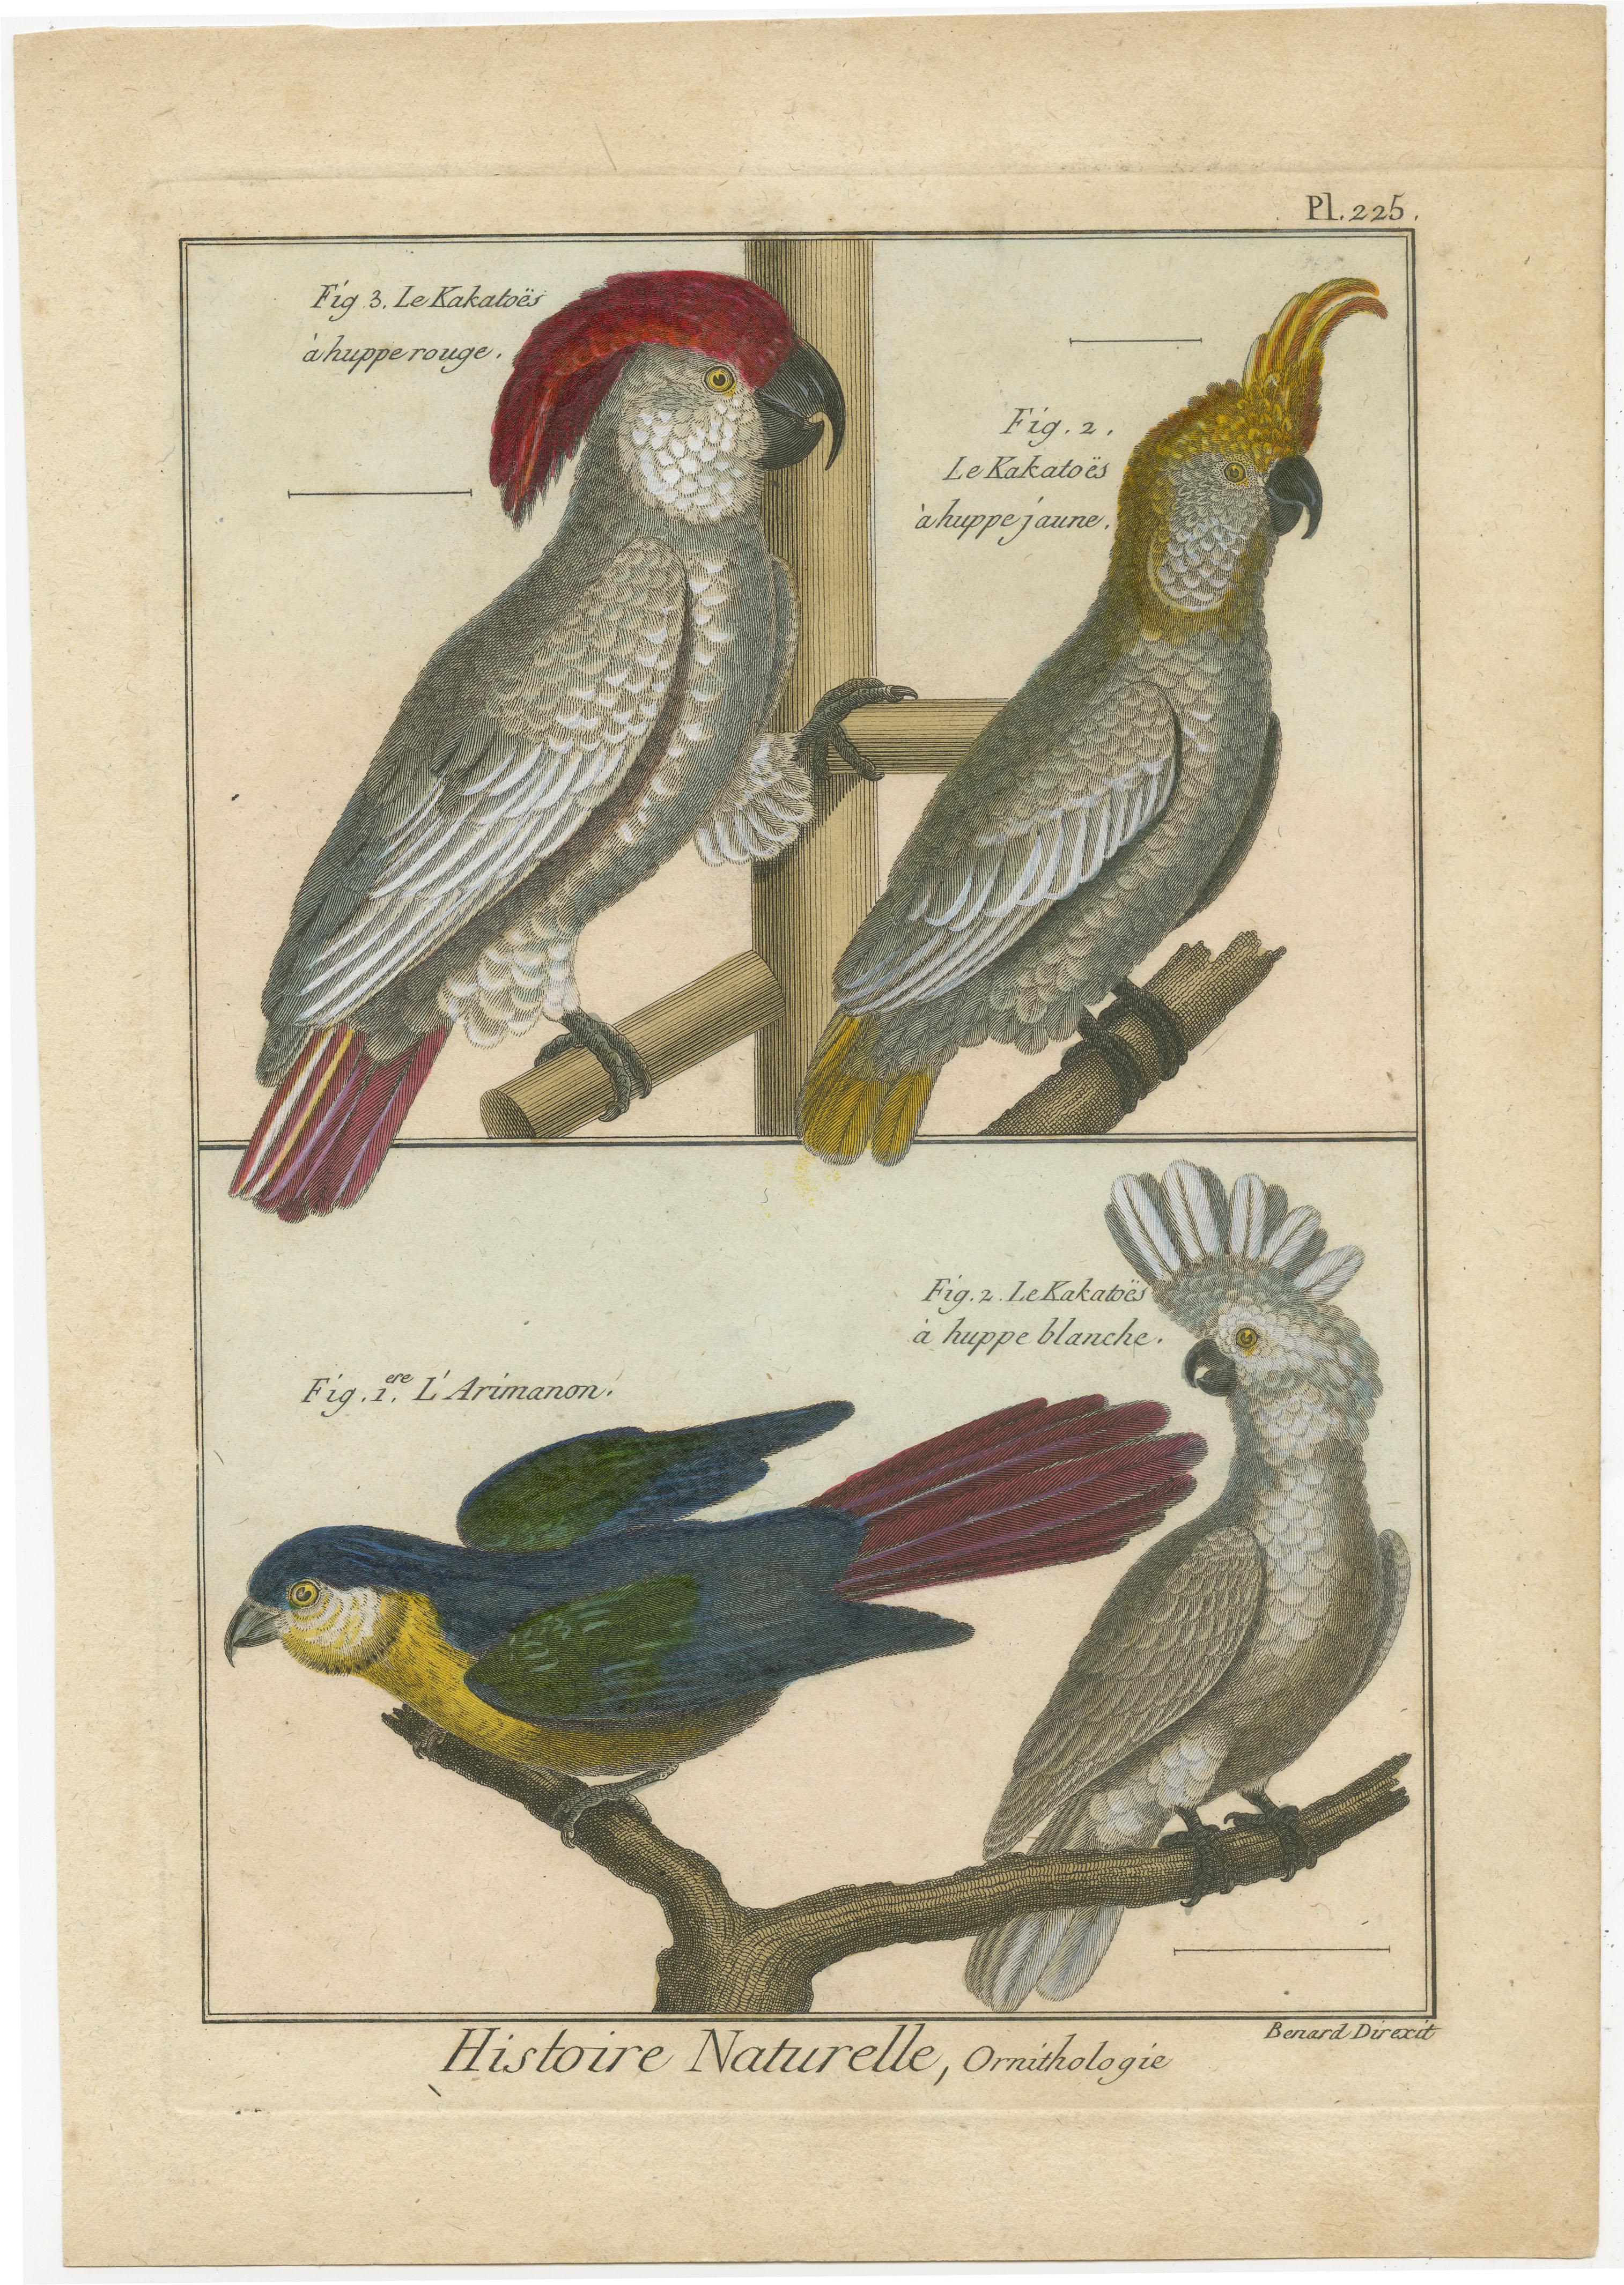 An authentic, perfect and bright, originally hand-colored, illustration of 3 Cockatoos: Le Kakatoes a Huppe Rouge, Le Kakatoes a Huppe Jaune and Le Kakatoes a Huppe Blanche. Also 1 special Parakeet is displayed: L'Arimanon. It lives on French